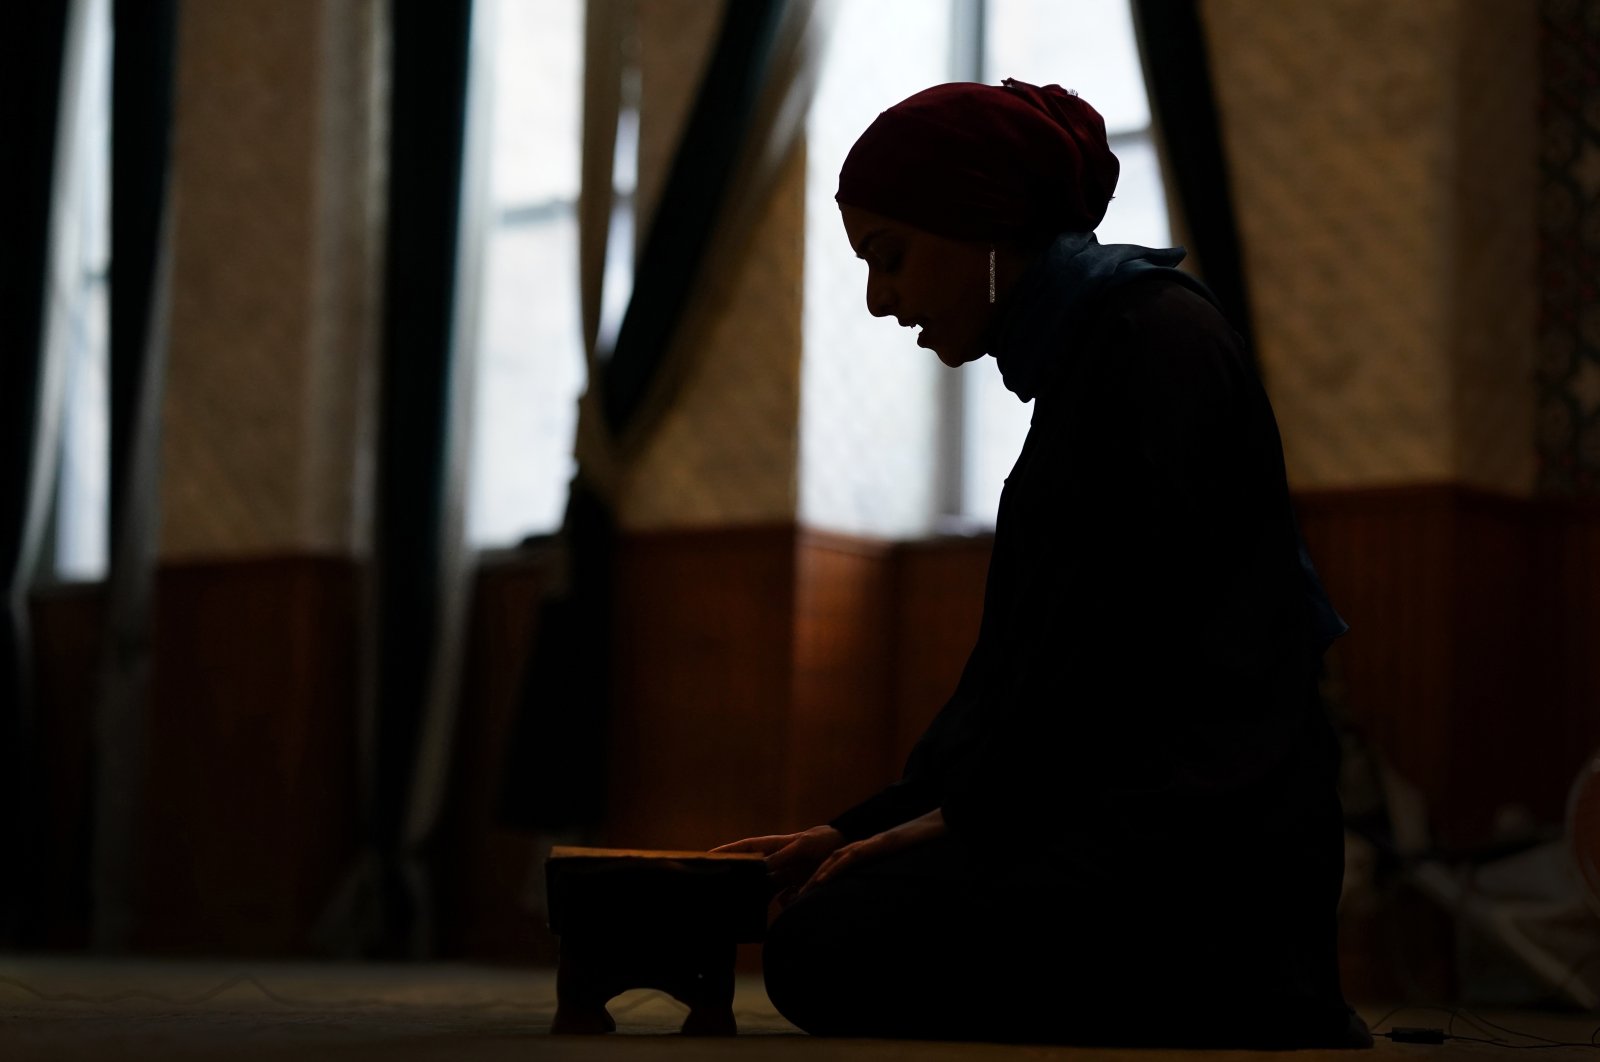 Madinah Javed is silhouetted as she recites the Quran in a prayer room at the American Islamic College, Chicago, U.S., Jan. 27, 2022. (AP Photo)